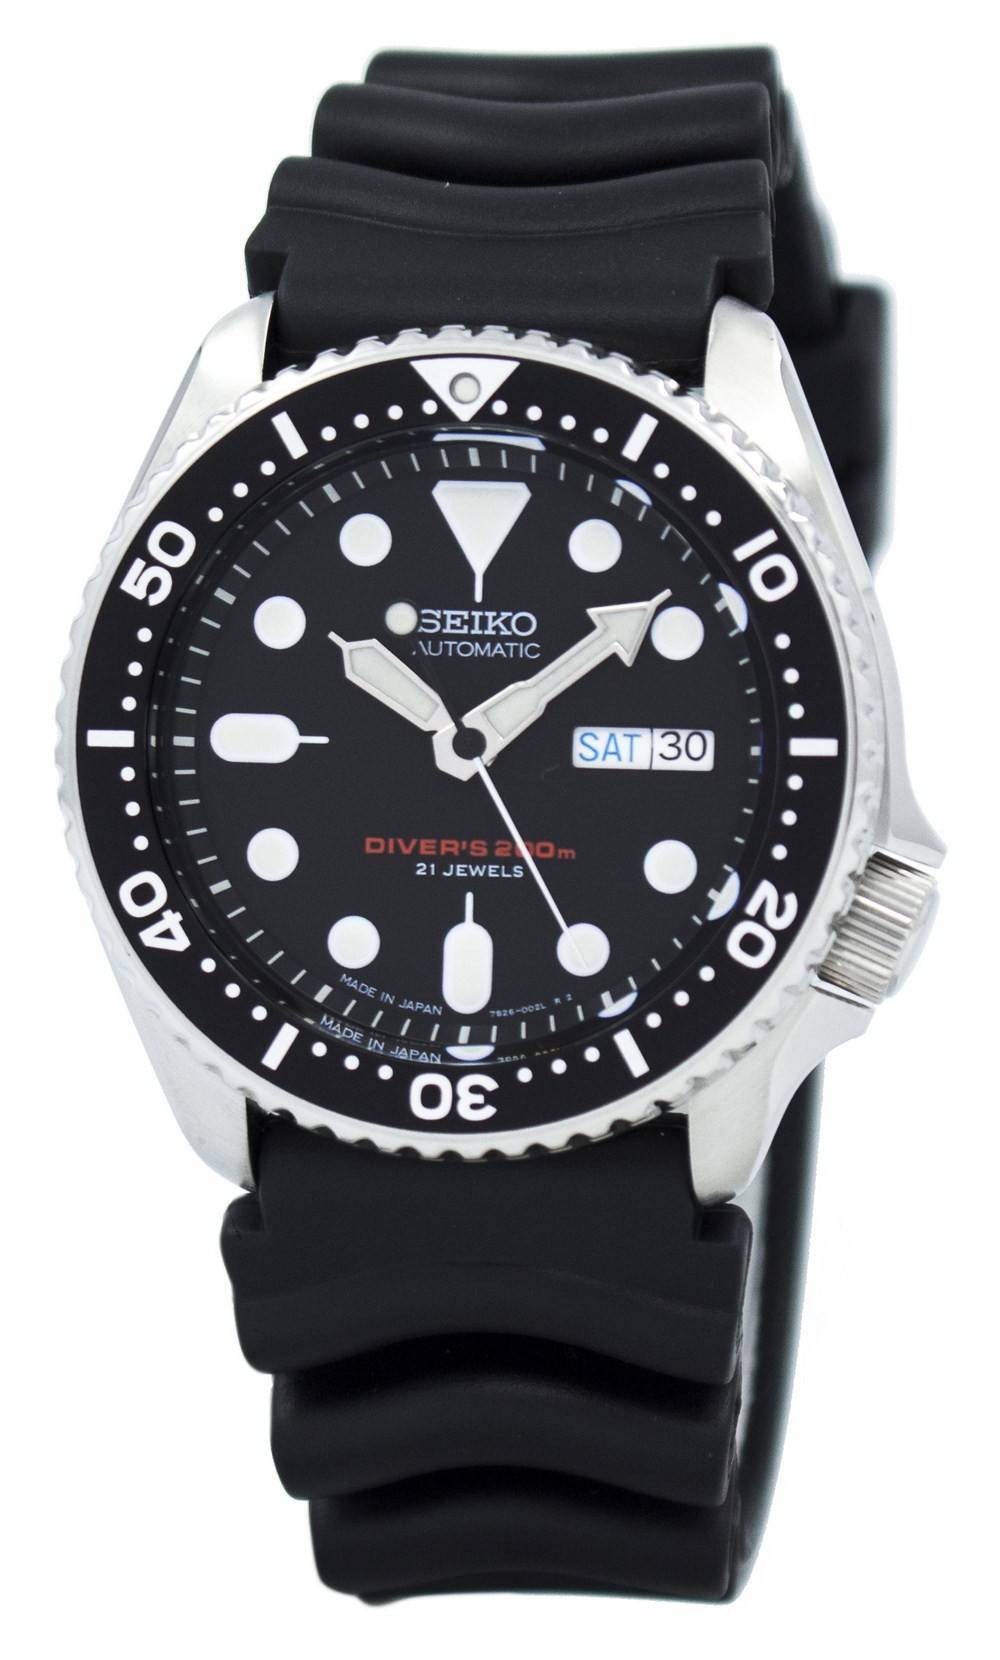 Seiko Automatic Watches for Men & Women - Chronograph Divers watch &  Premier EcoDrive Alarm watches